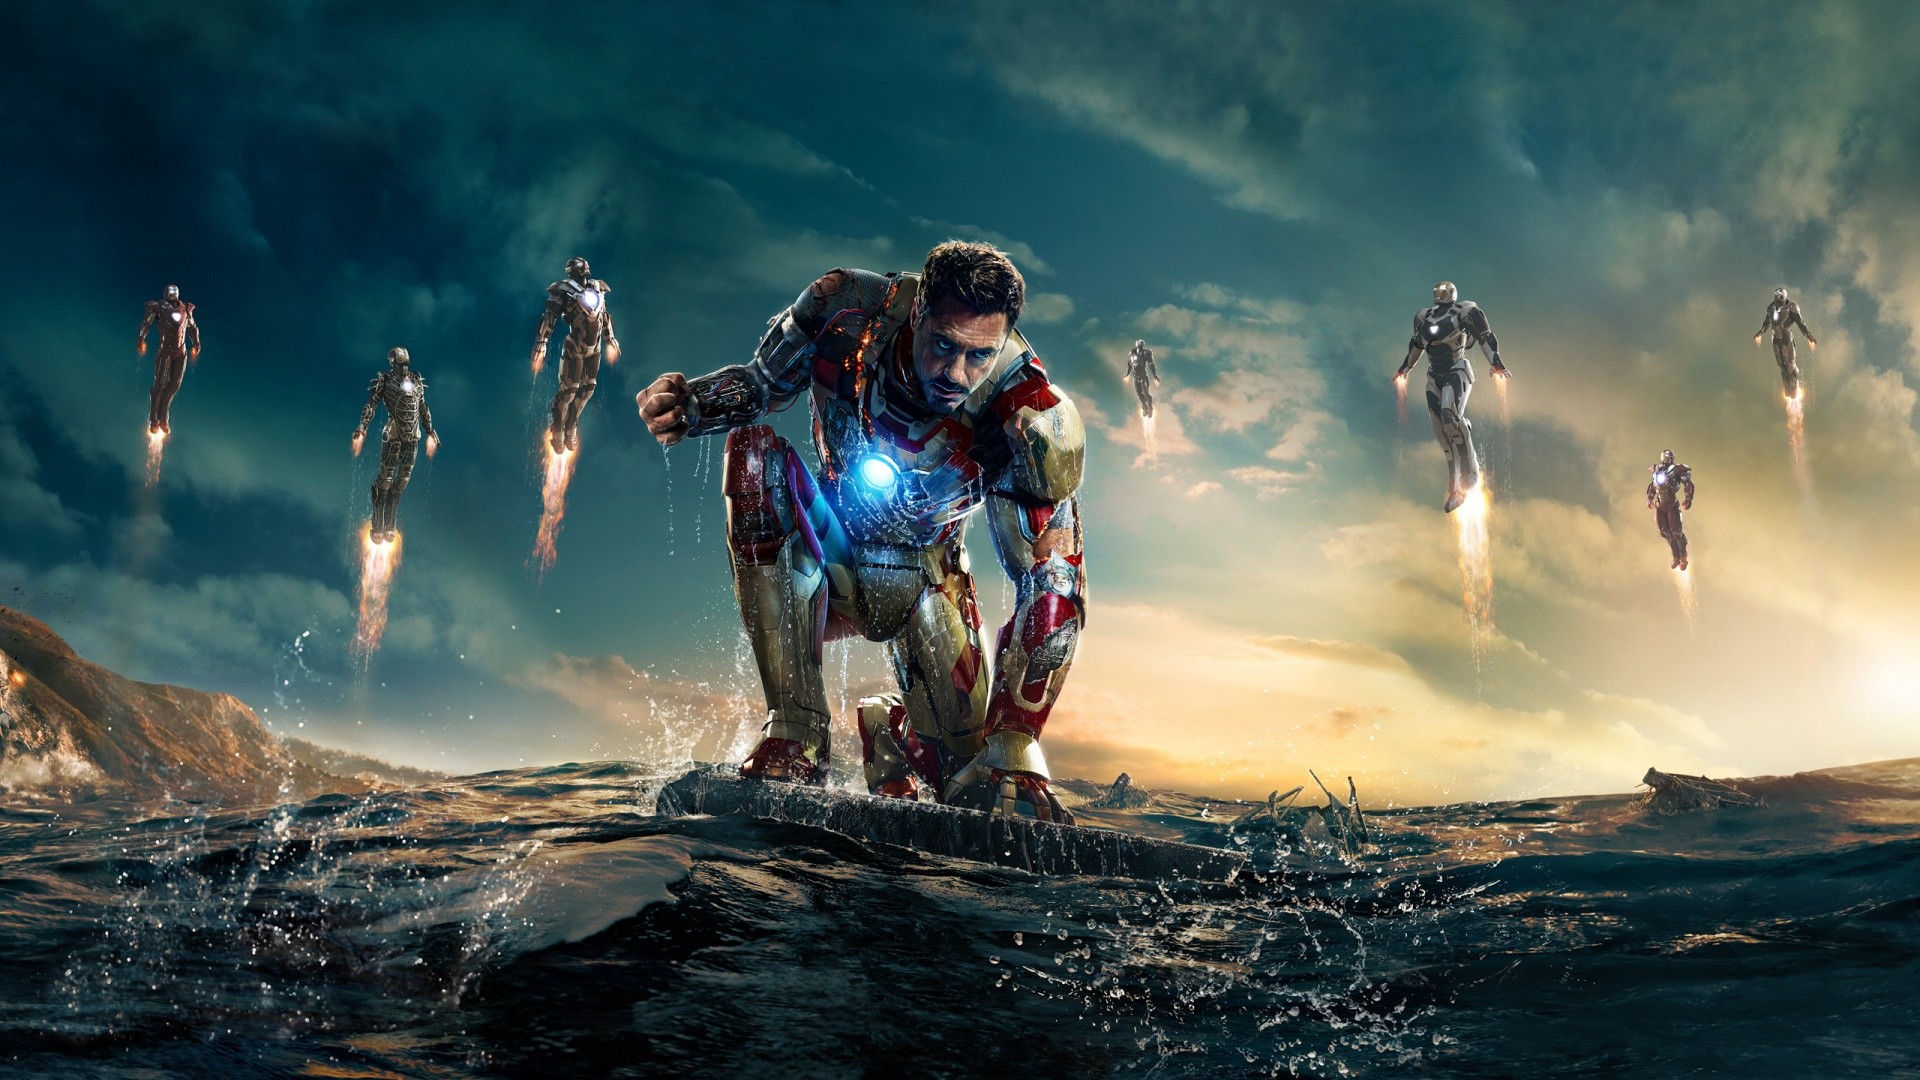 1920x1080 Iron Man Movie Wallpaper Iron Man Movies Wallpapers) – Free Backgrounds and  Wallpapers